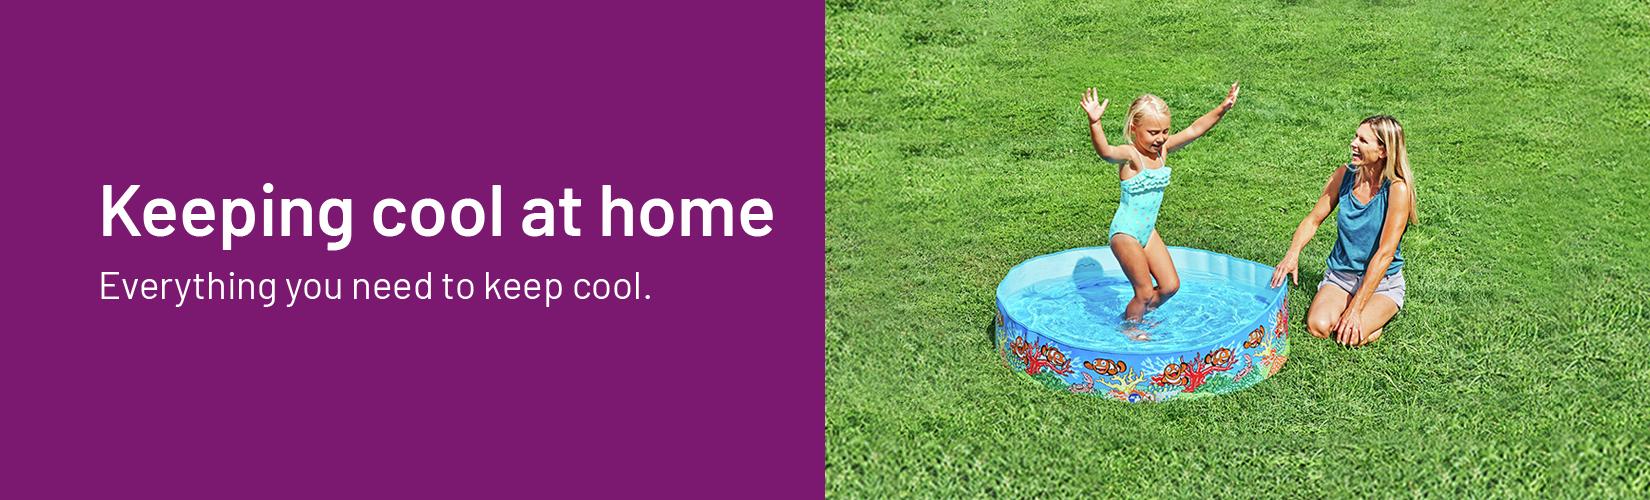 Keeping cool at home. Everything you need to keep cool.